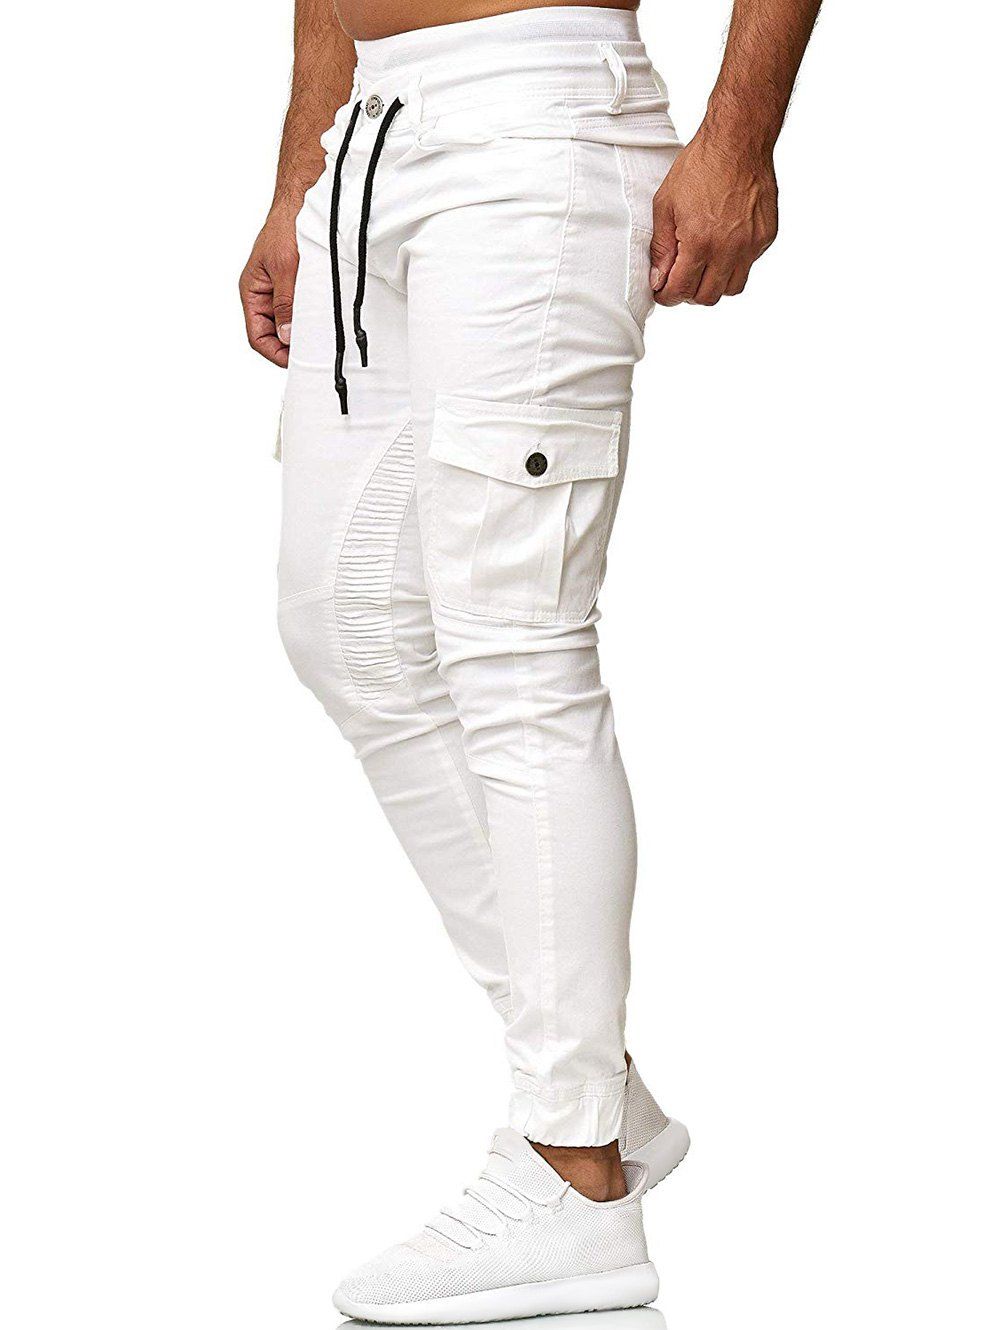 [38% OFF] 2020 Pleated Trim Drawstring Cargo Jogger Pants In WHITE ...